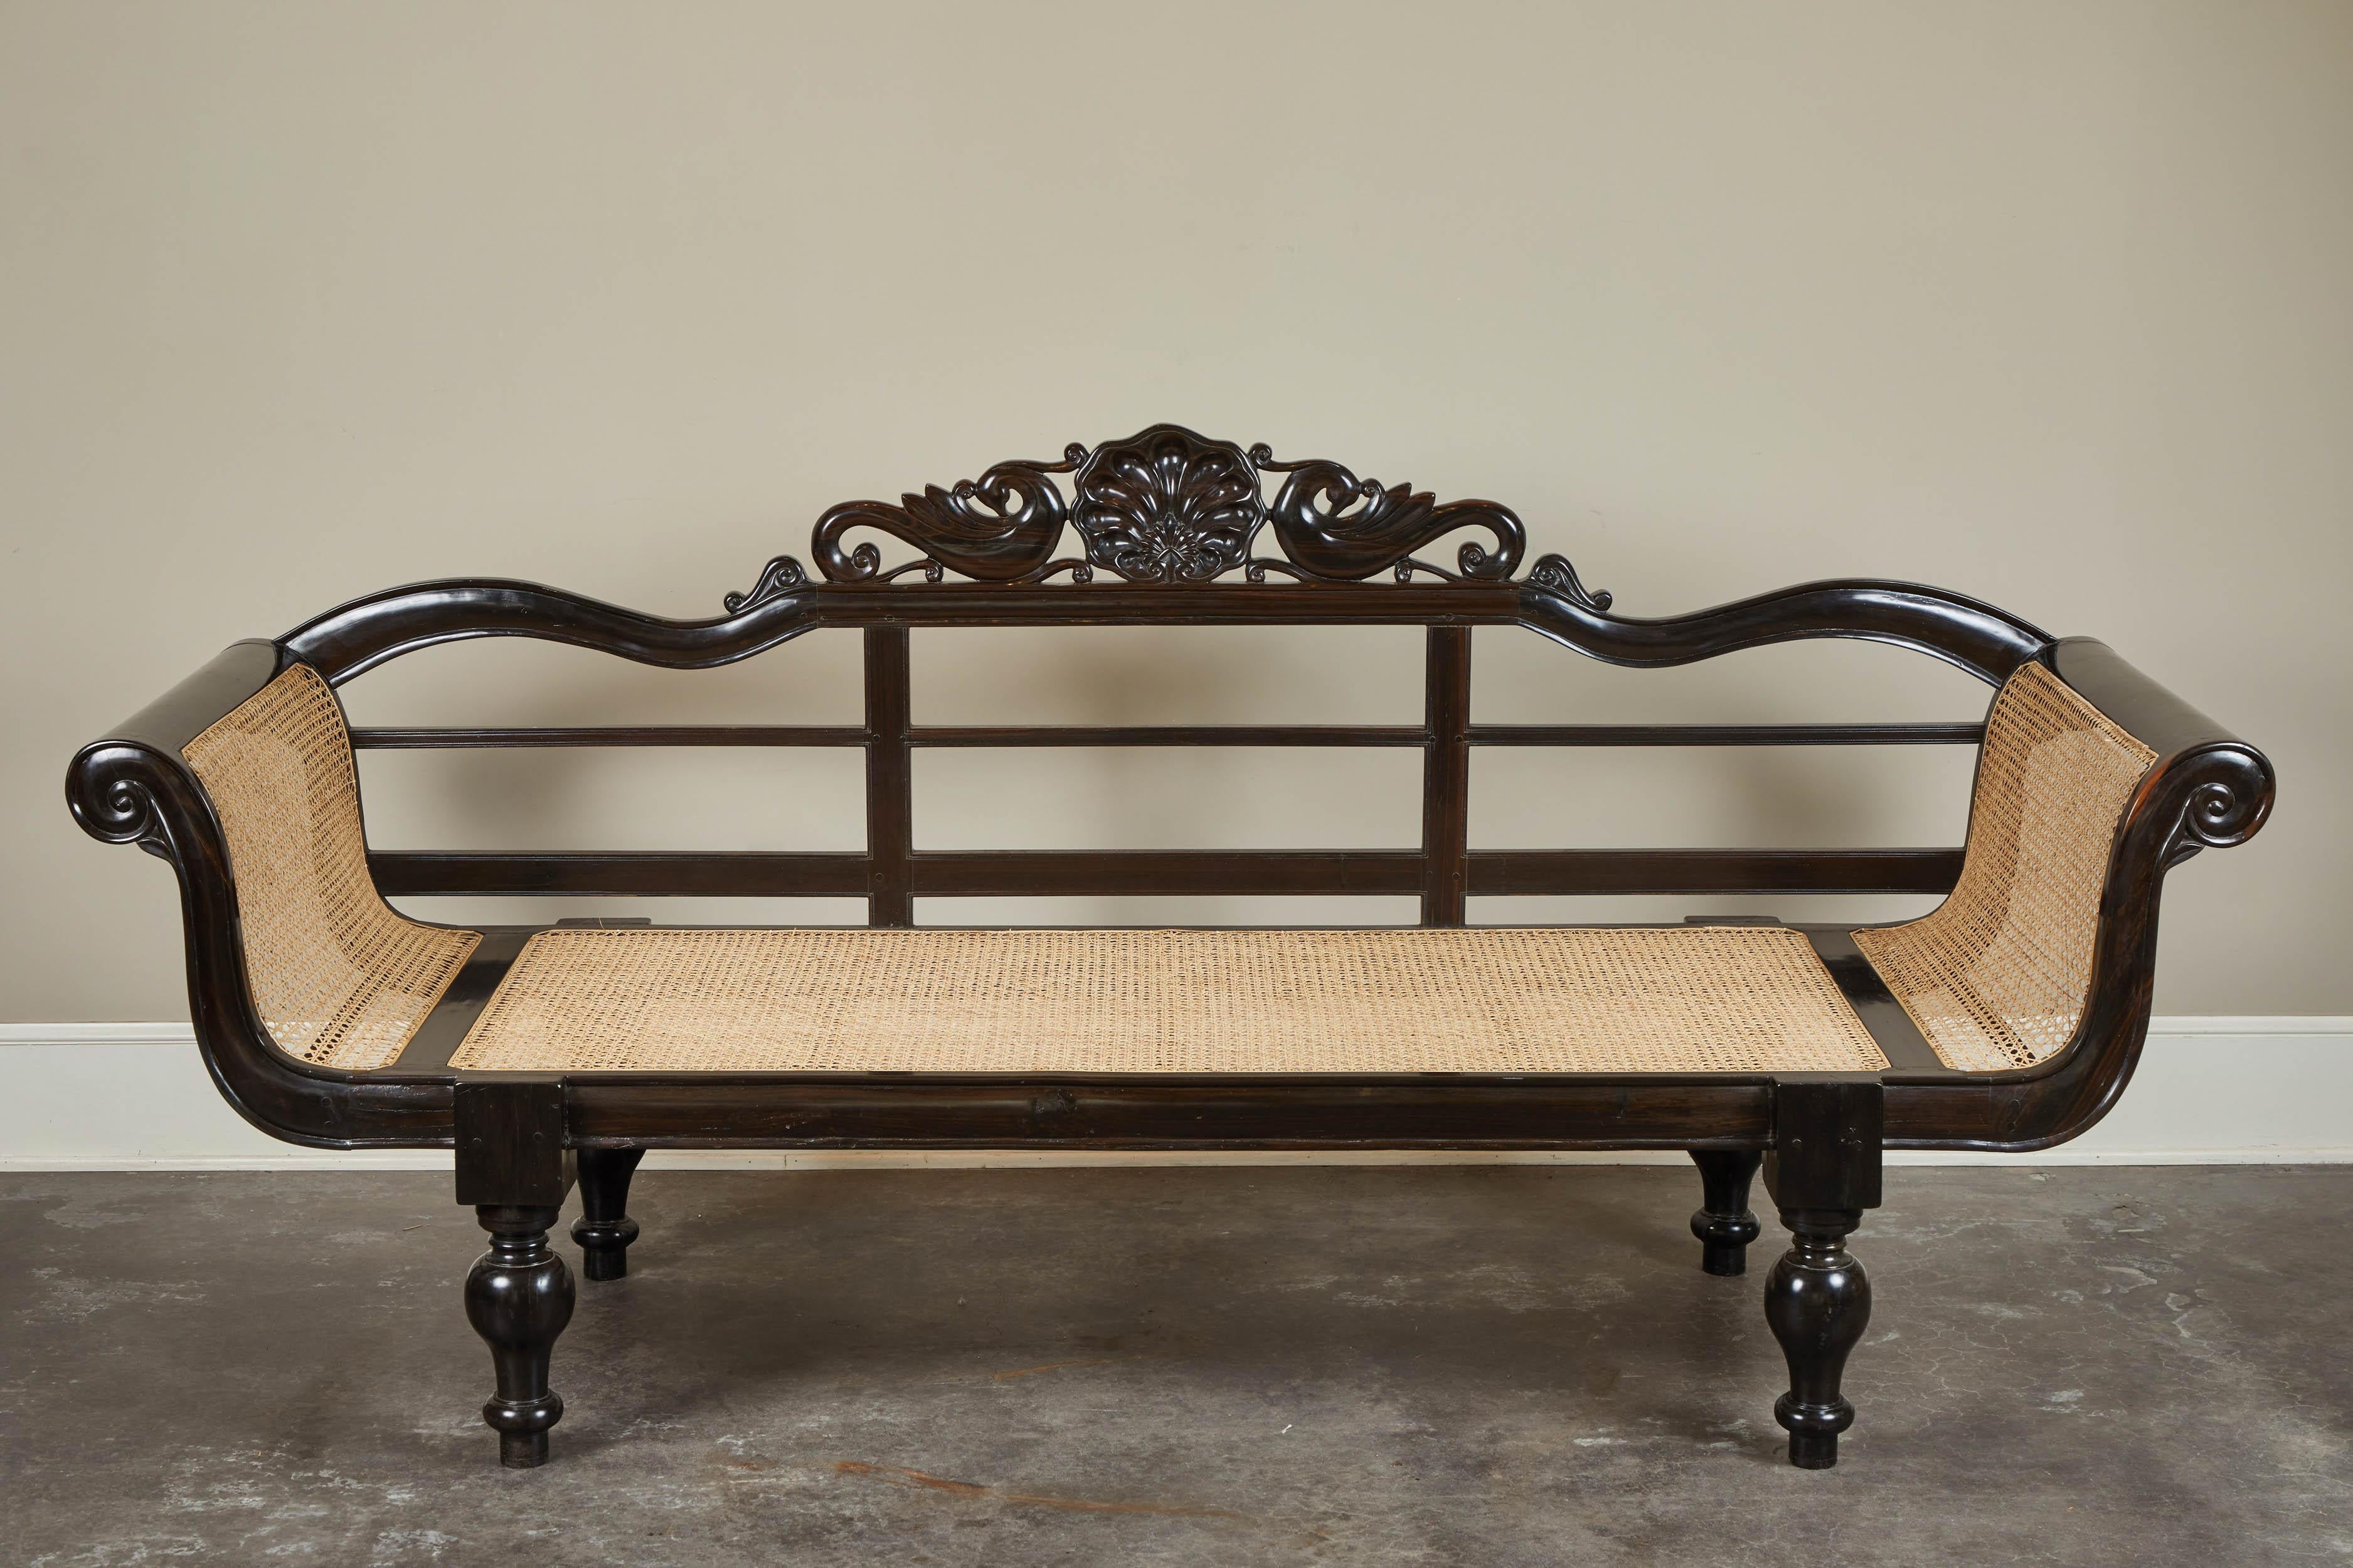 Sri Lankan 20th Century British Colonial Ebony Bench with Caned Seat and Arms